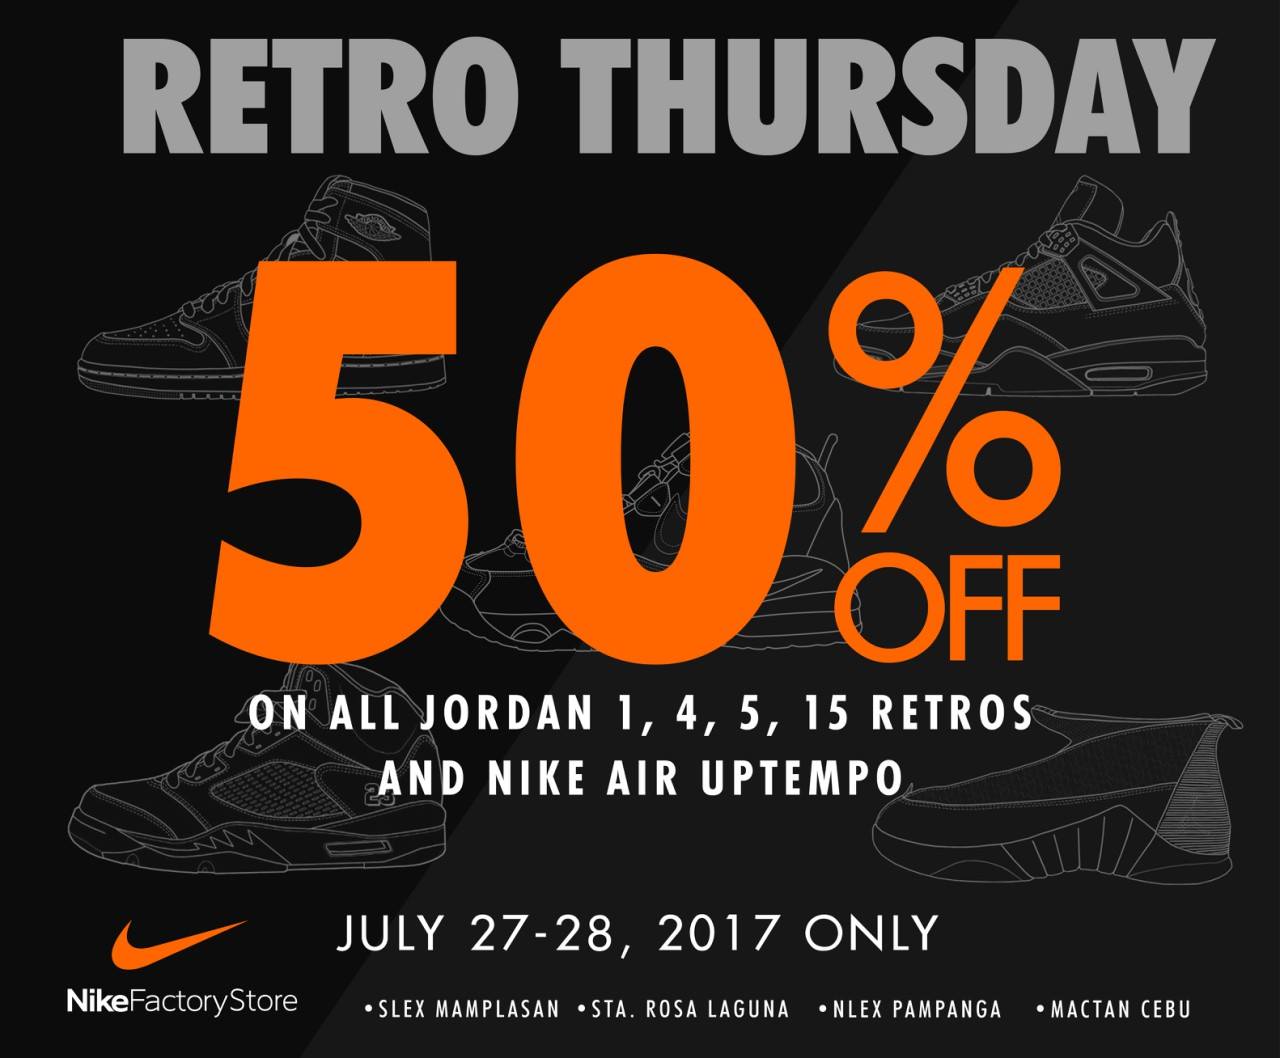 nike factory outlet nlex sale